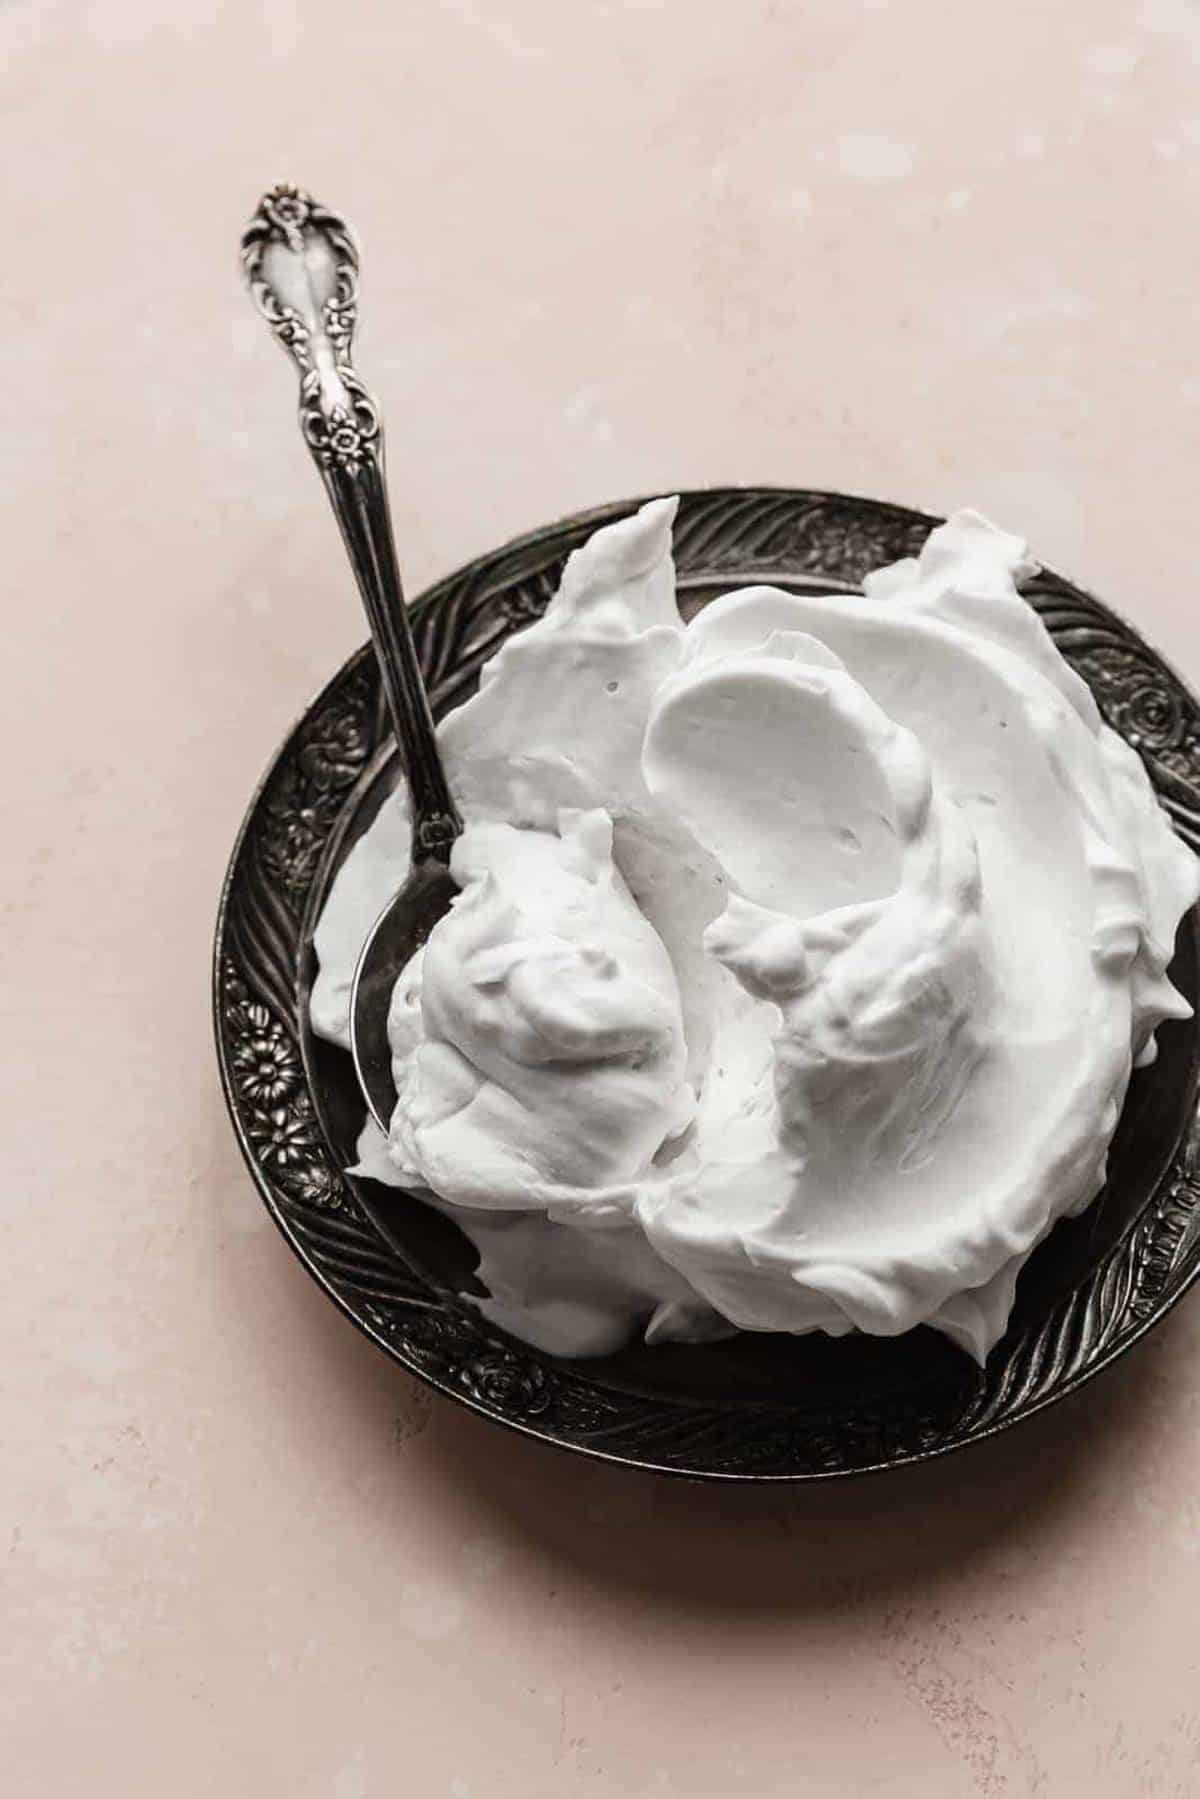 Coconut Whipped Cream on an antique plate on a light pink background.